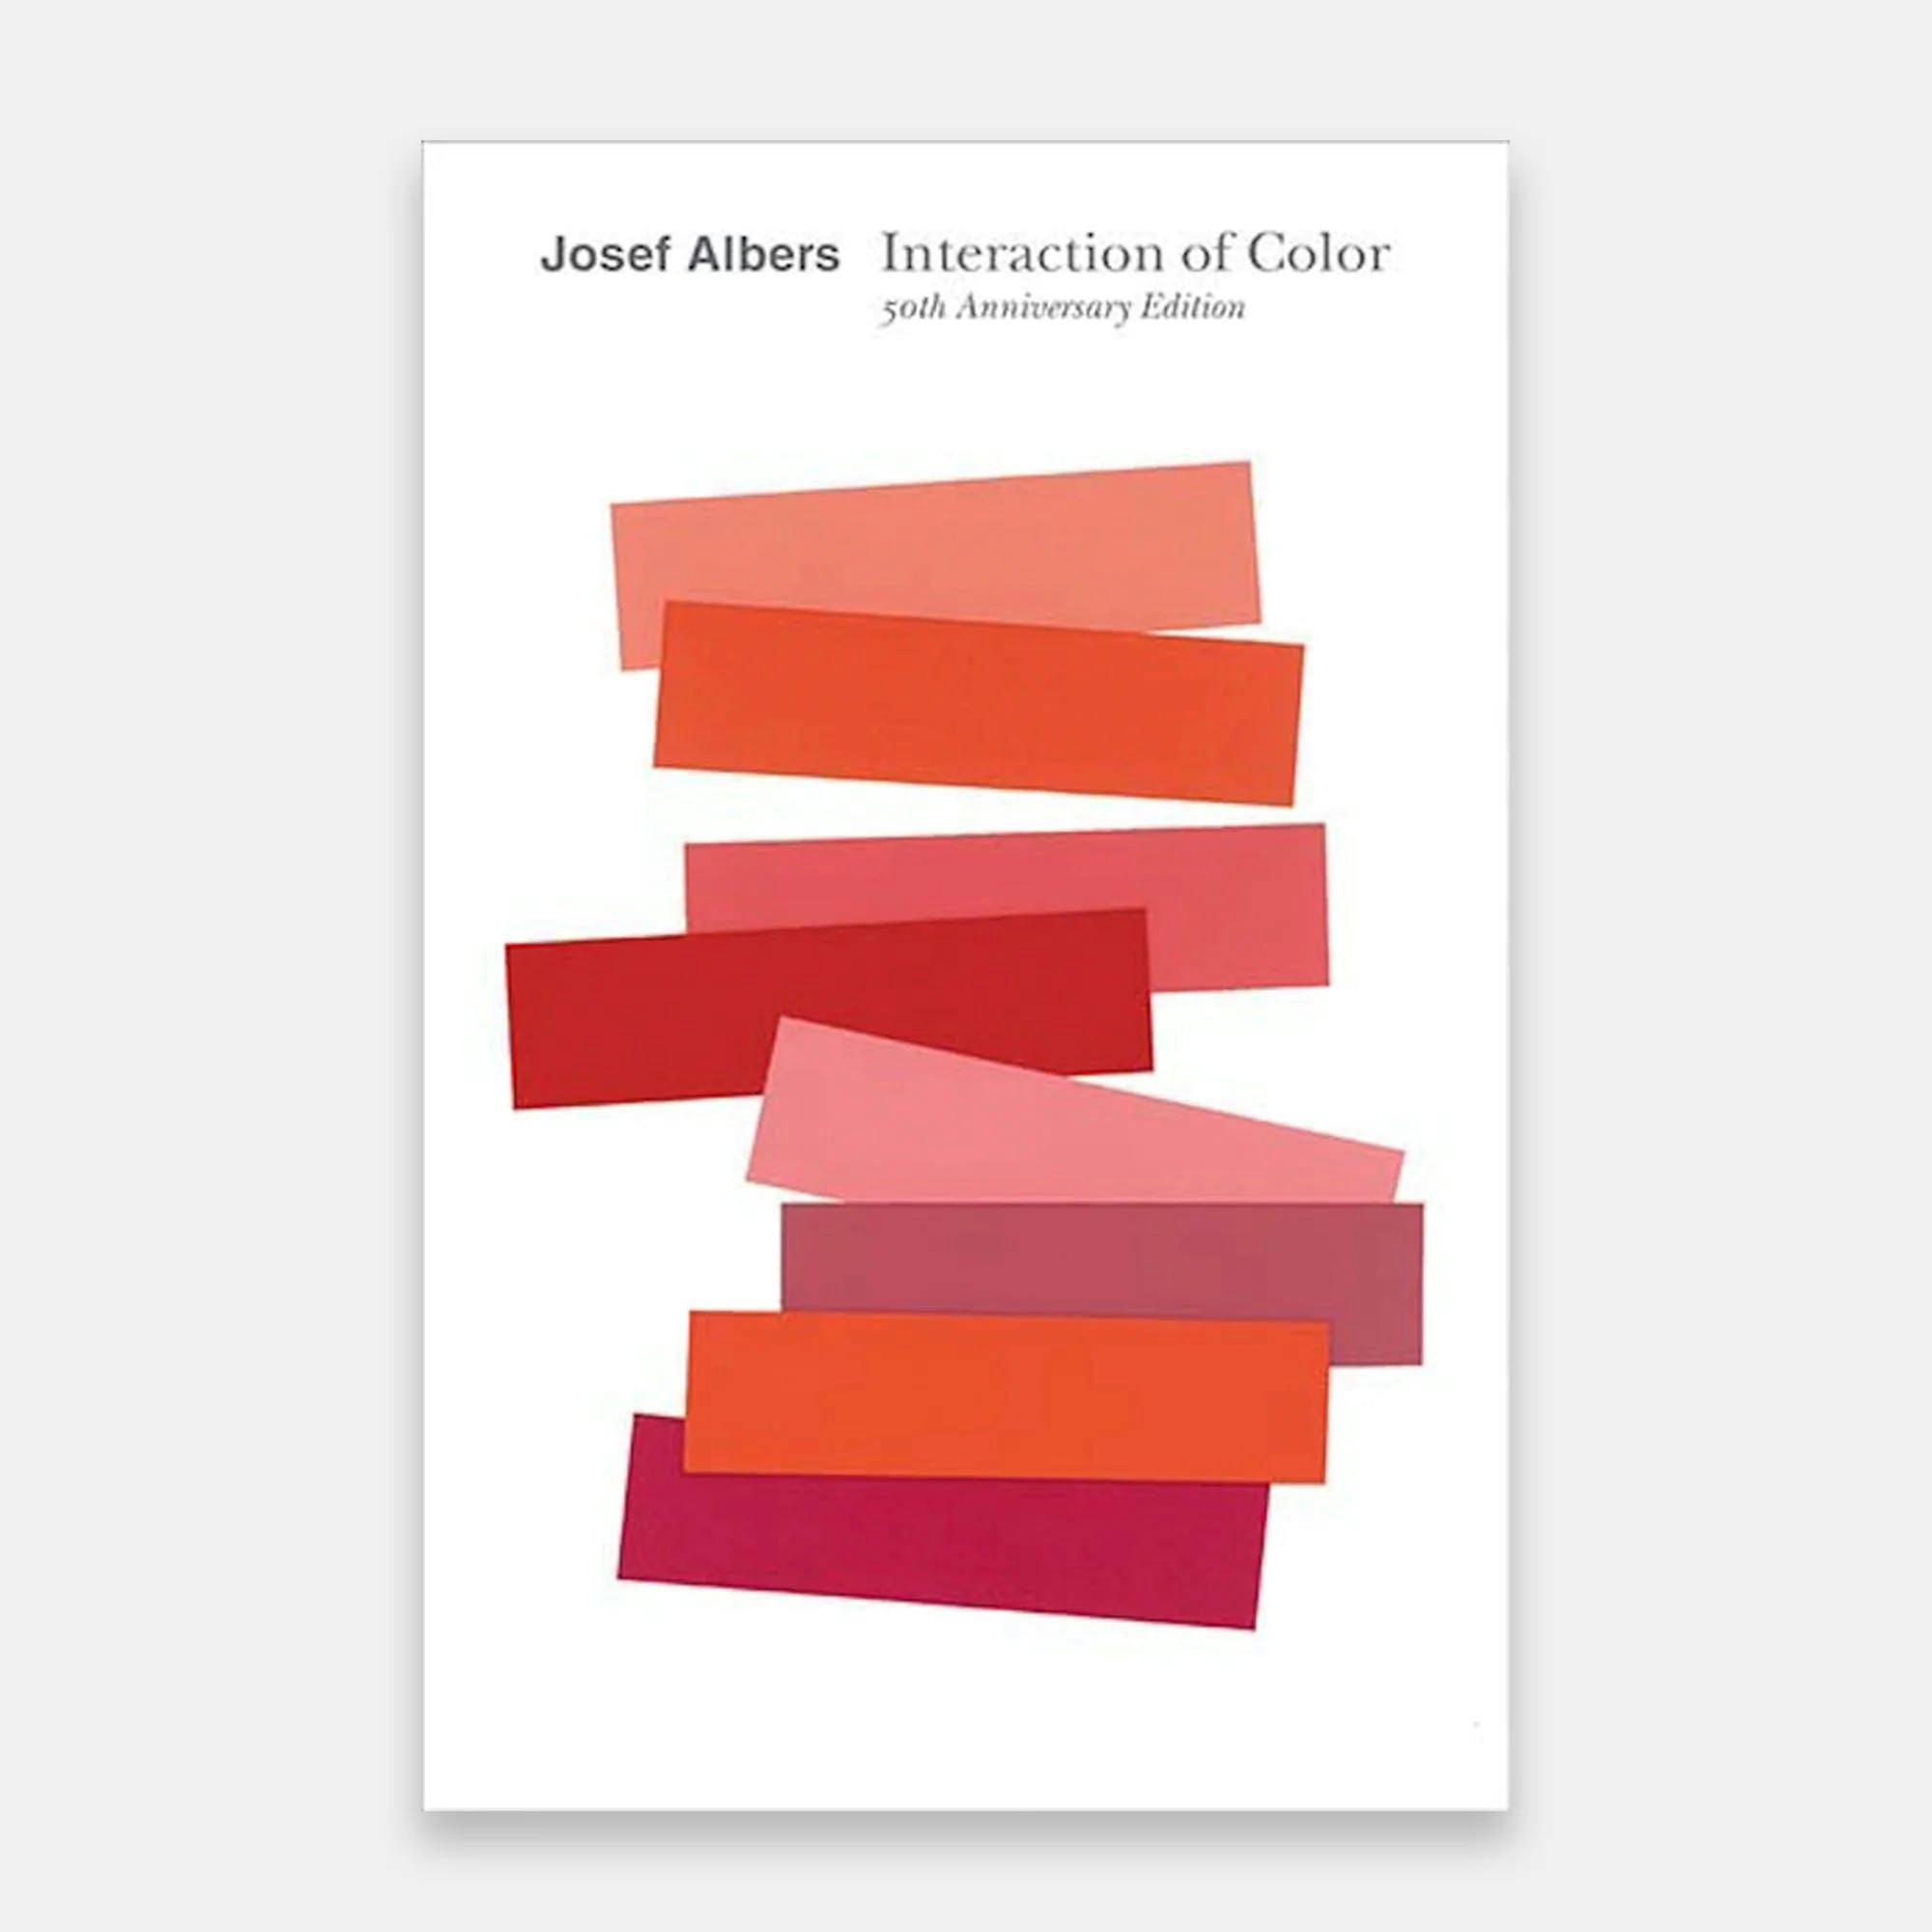 White book cover with rectangles in various shades of red